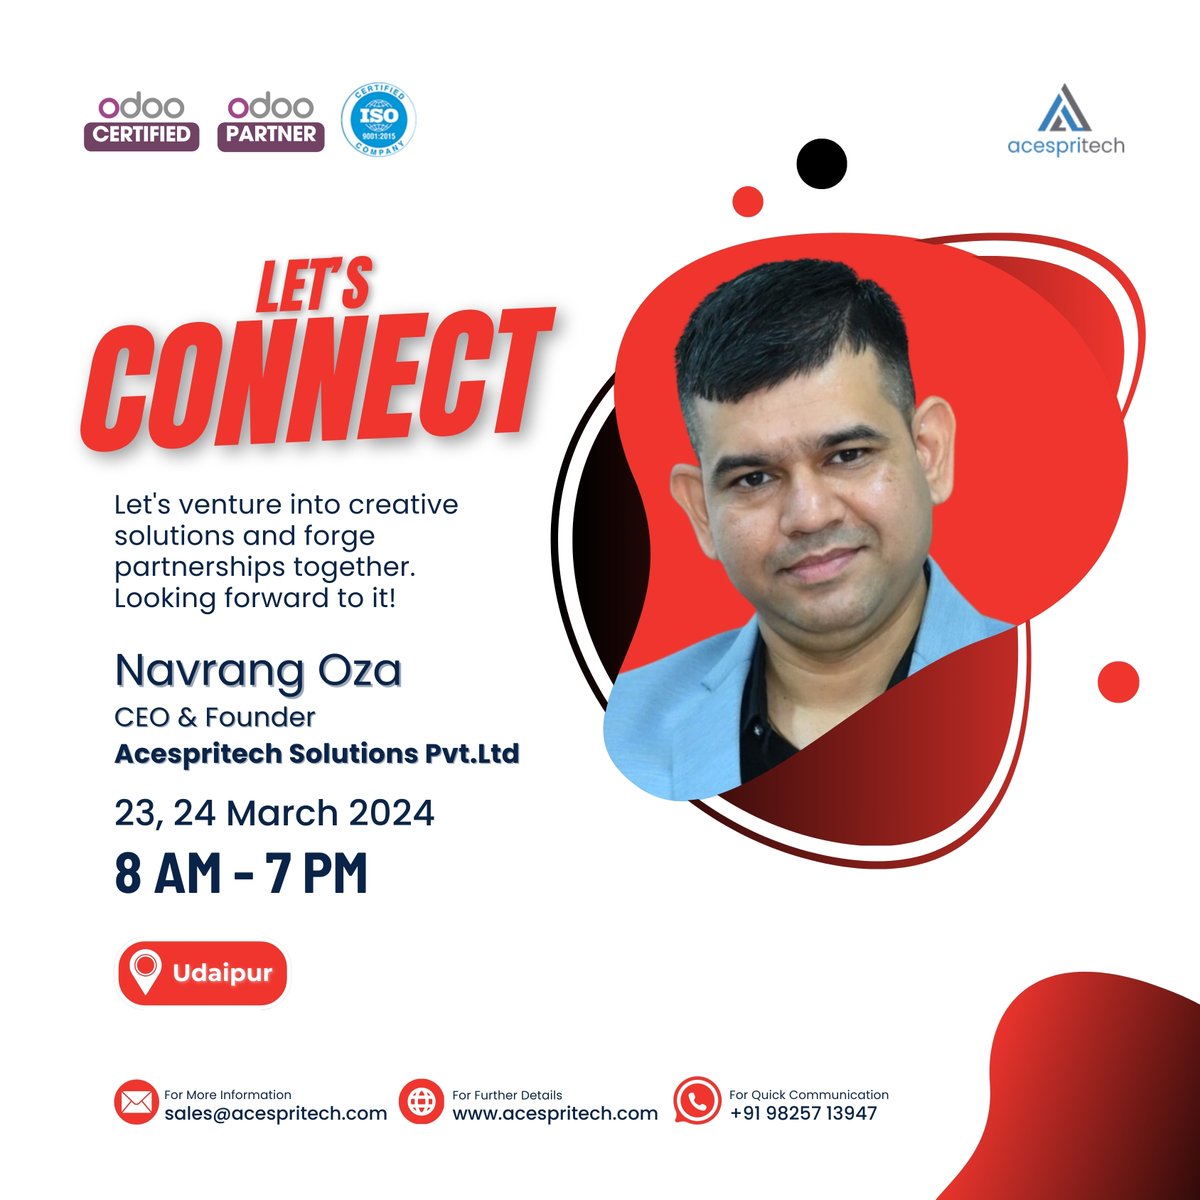 See you there! 🙋‍♂️

#laracon2024 #laracon #laravel #udaipur #udaipurtimes #mewarbanquet #acespritech